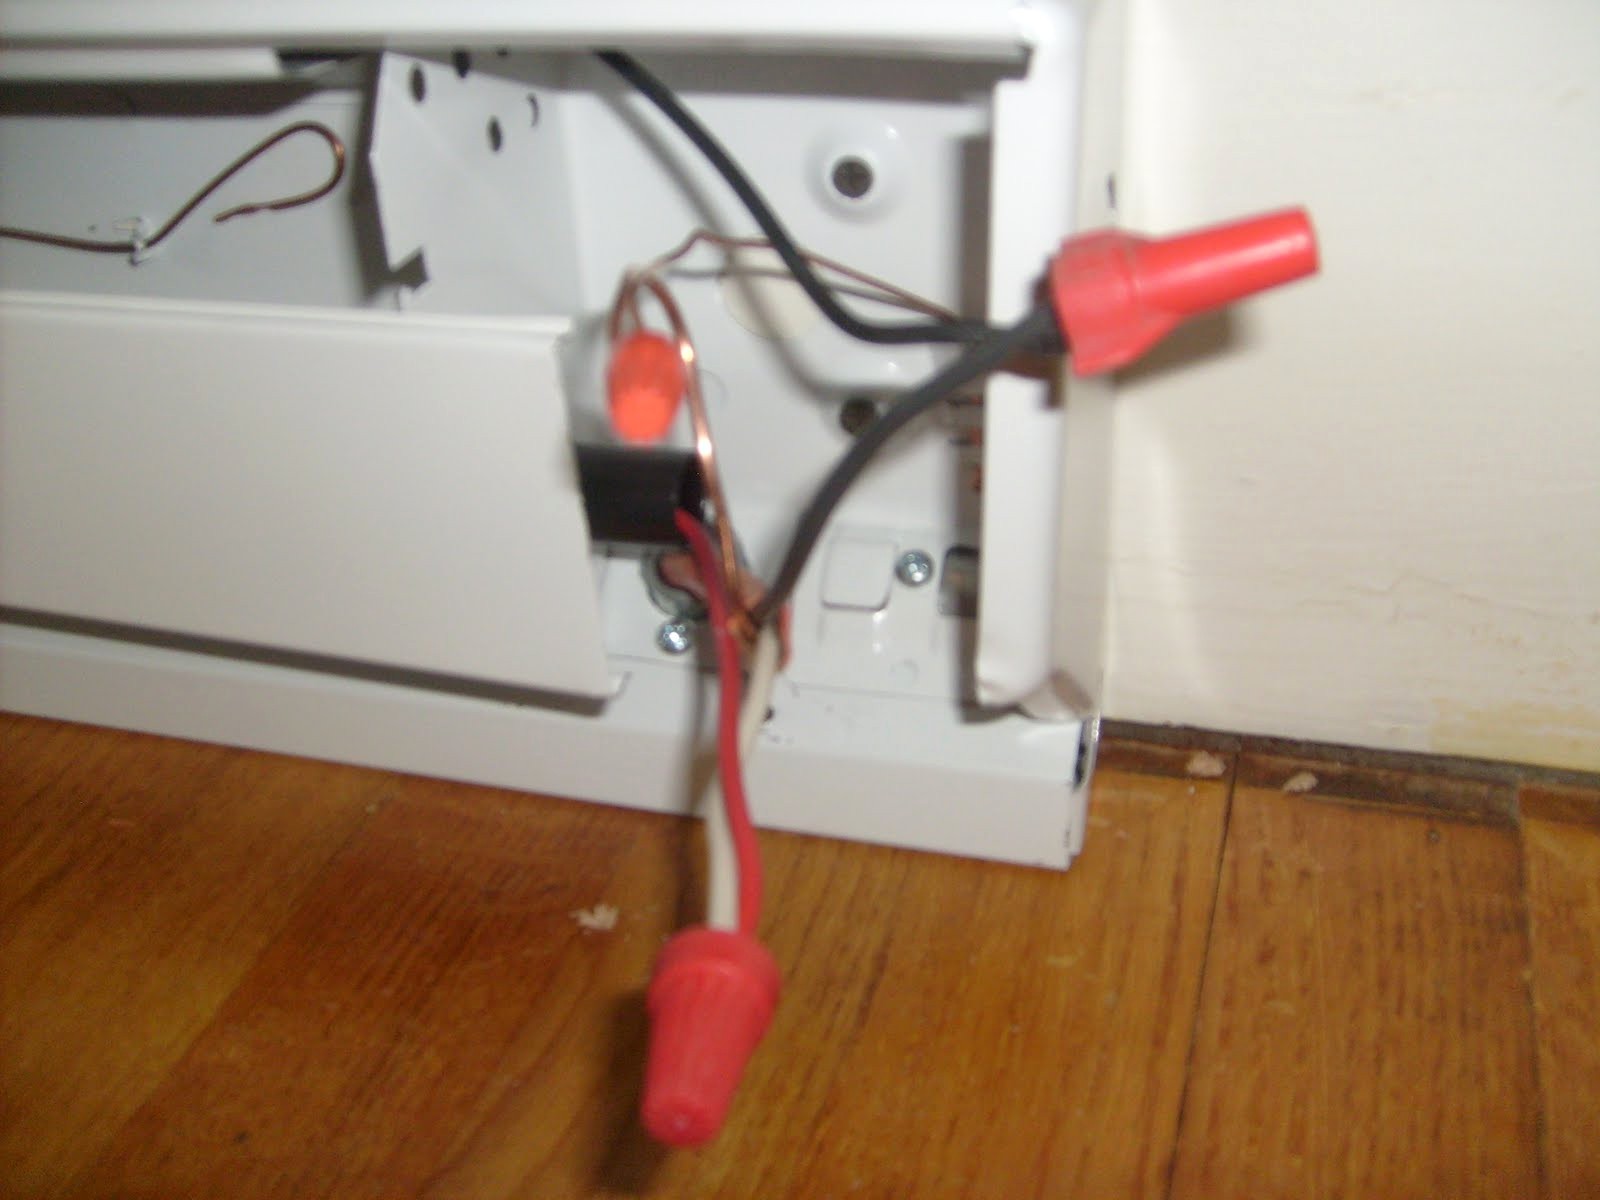 240 Volt Baseboard Heater Wiring Diagram Awesome How to Install A Double Pole 240 Volt Baseboard